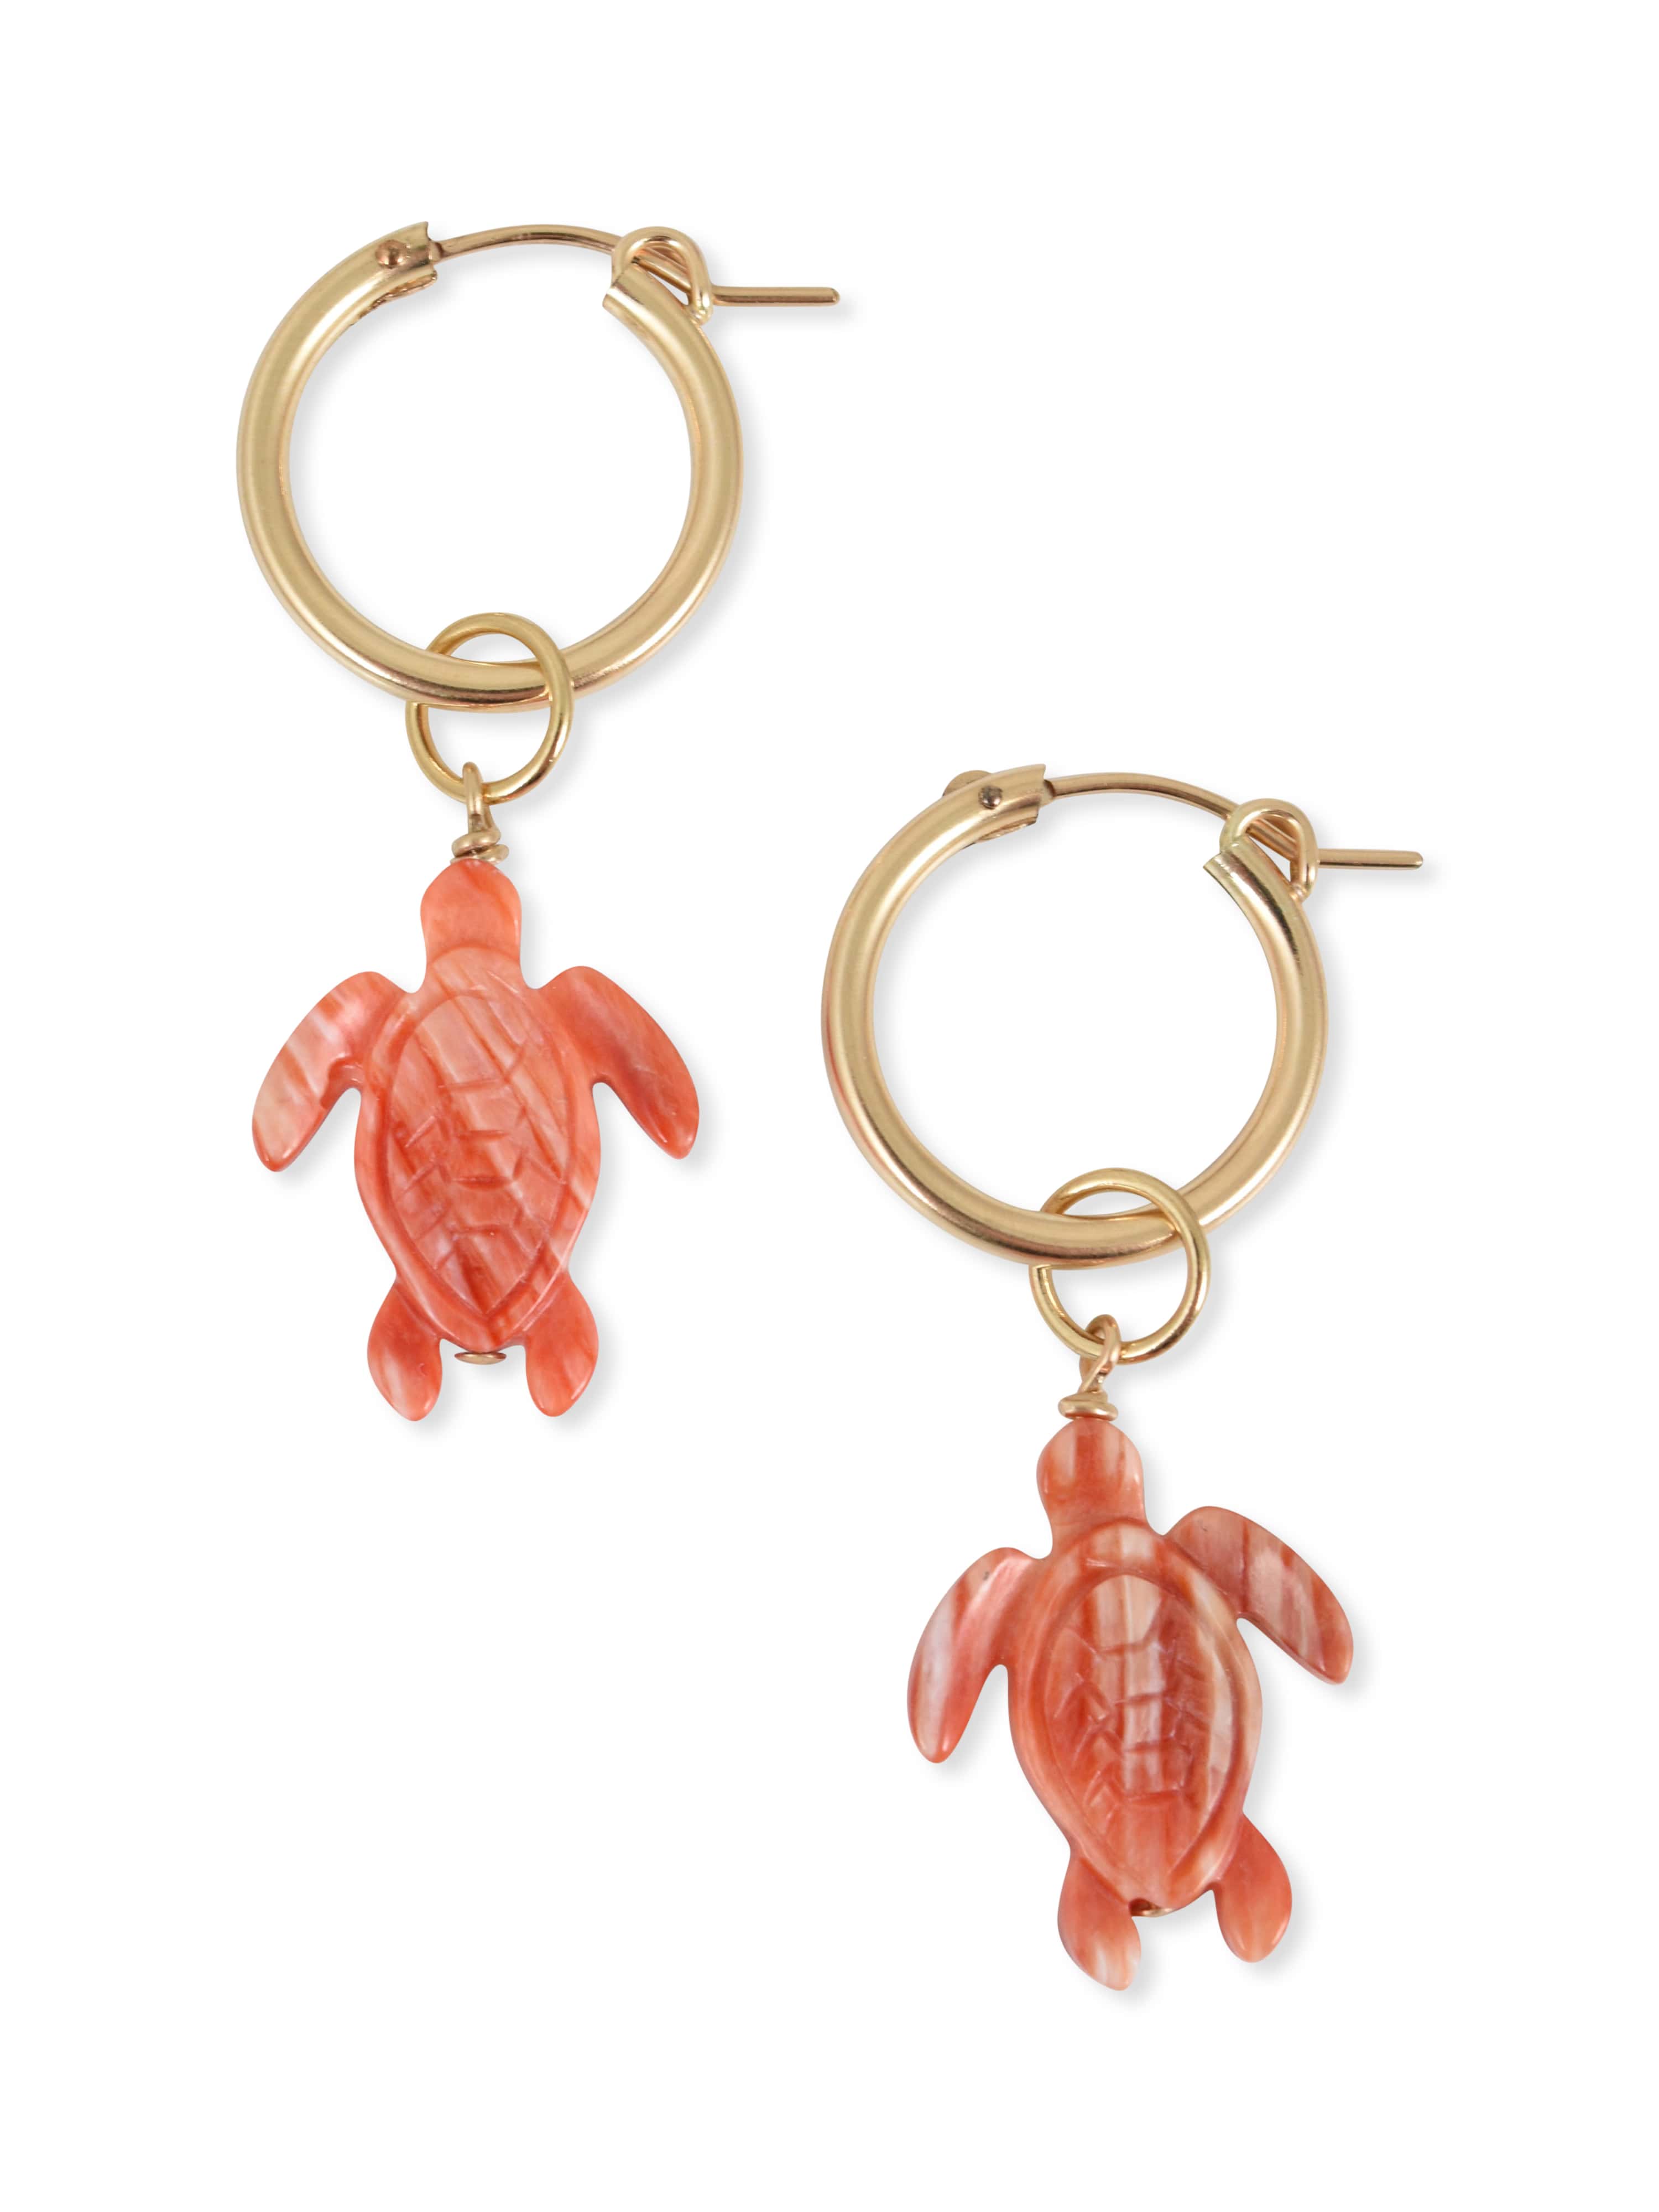 Turtle Charm in Orange Spiny Oyster